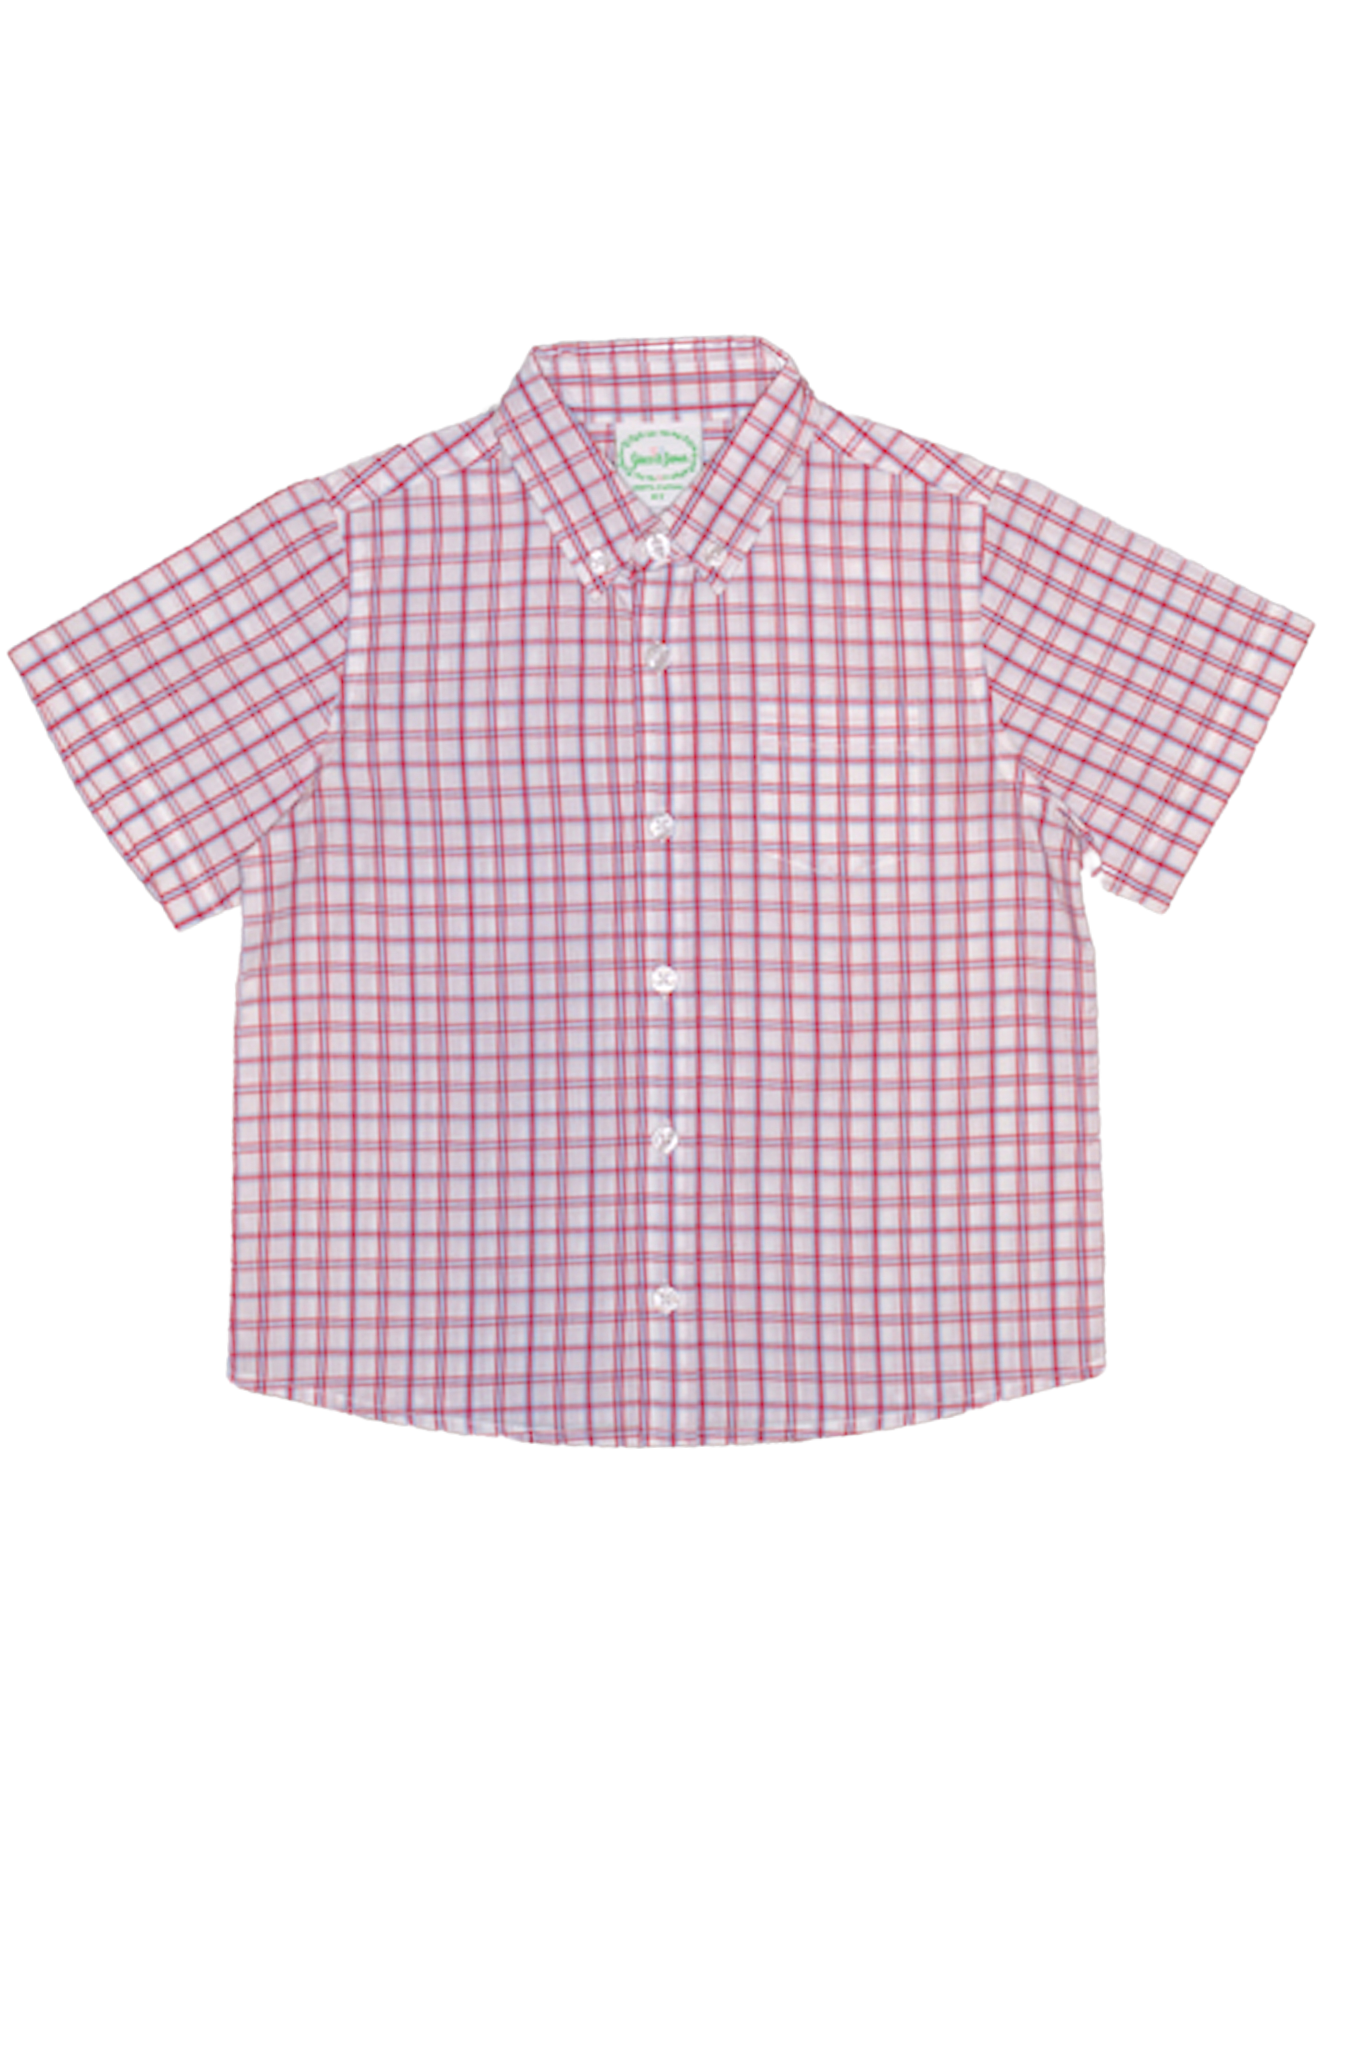 Boy's Red and White Plaid Short Sleeve Button Down